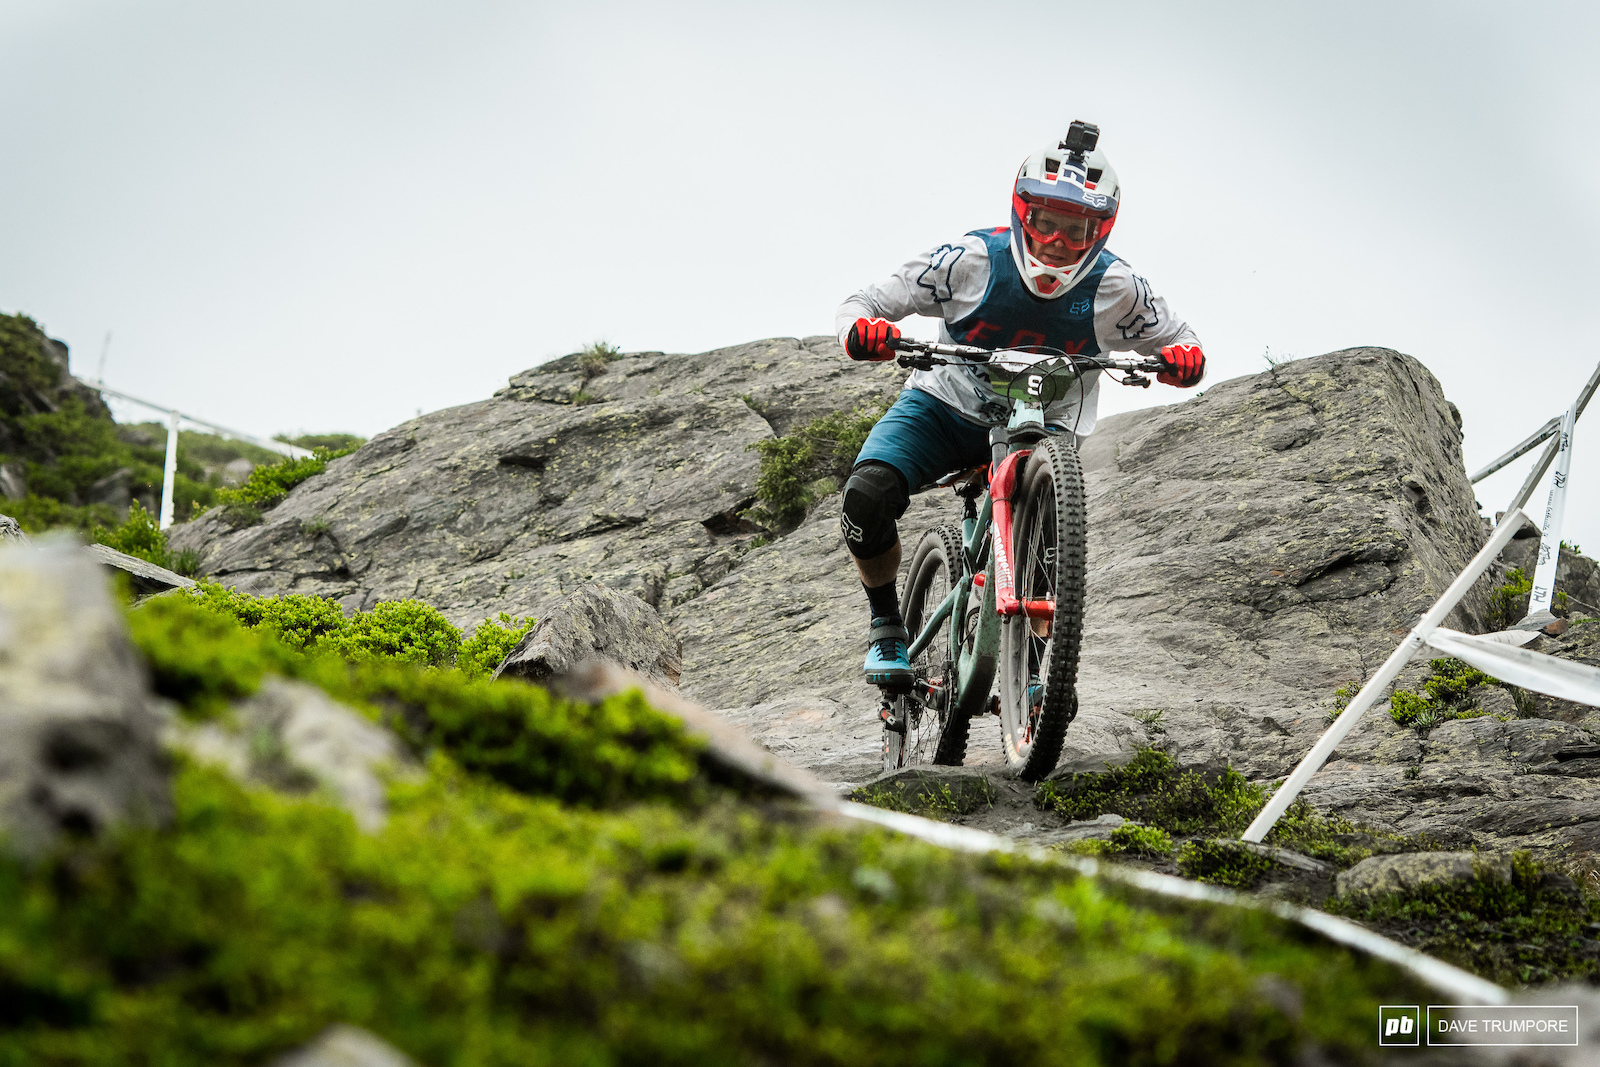 Mark Scott has been in the top 10 all year long and these long tracks should play to his favor. He took his first EWS podium last year in Whistler is a similar style race so he is definitely one to watch in La Thuile.